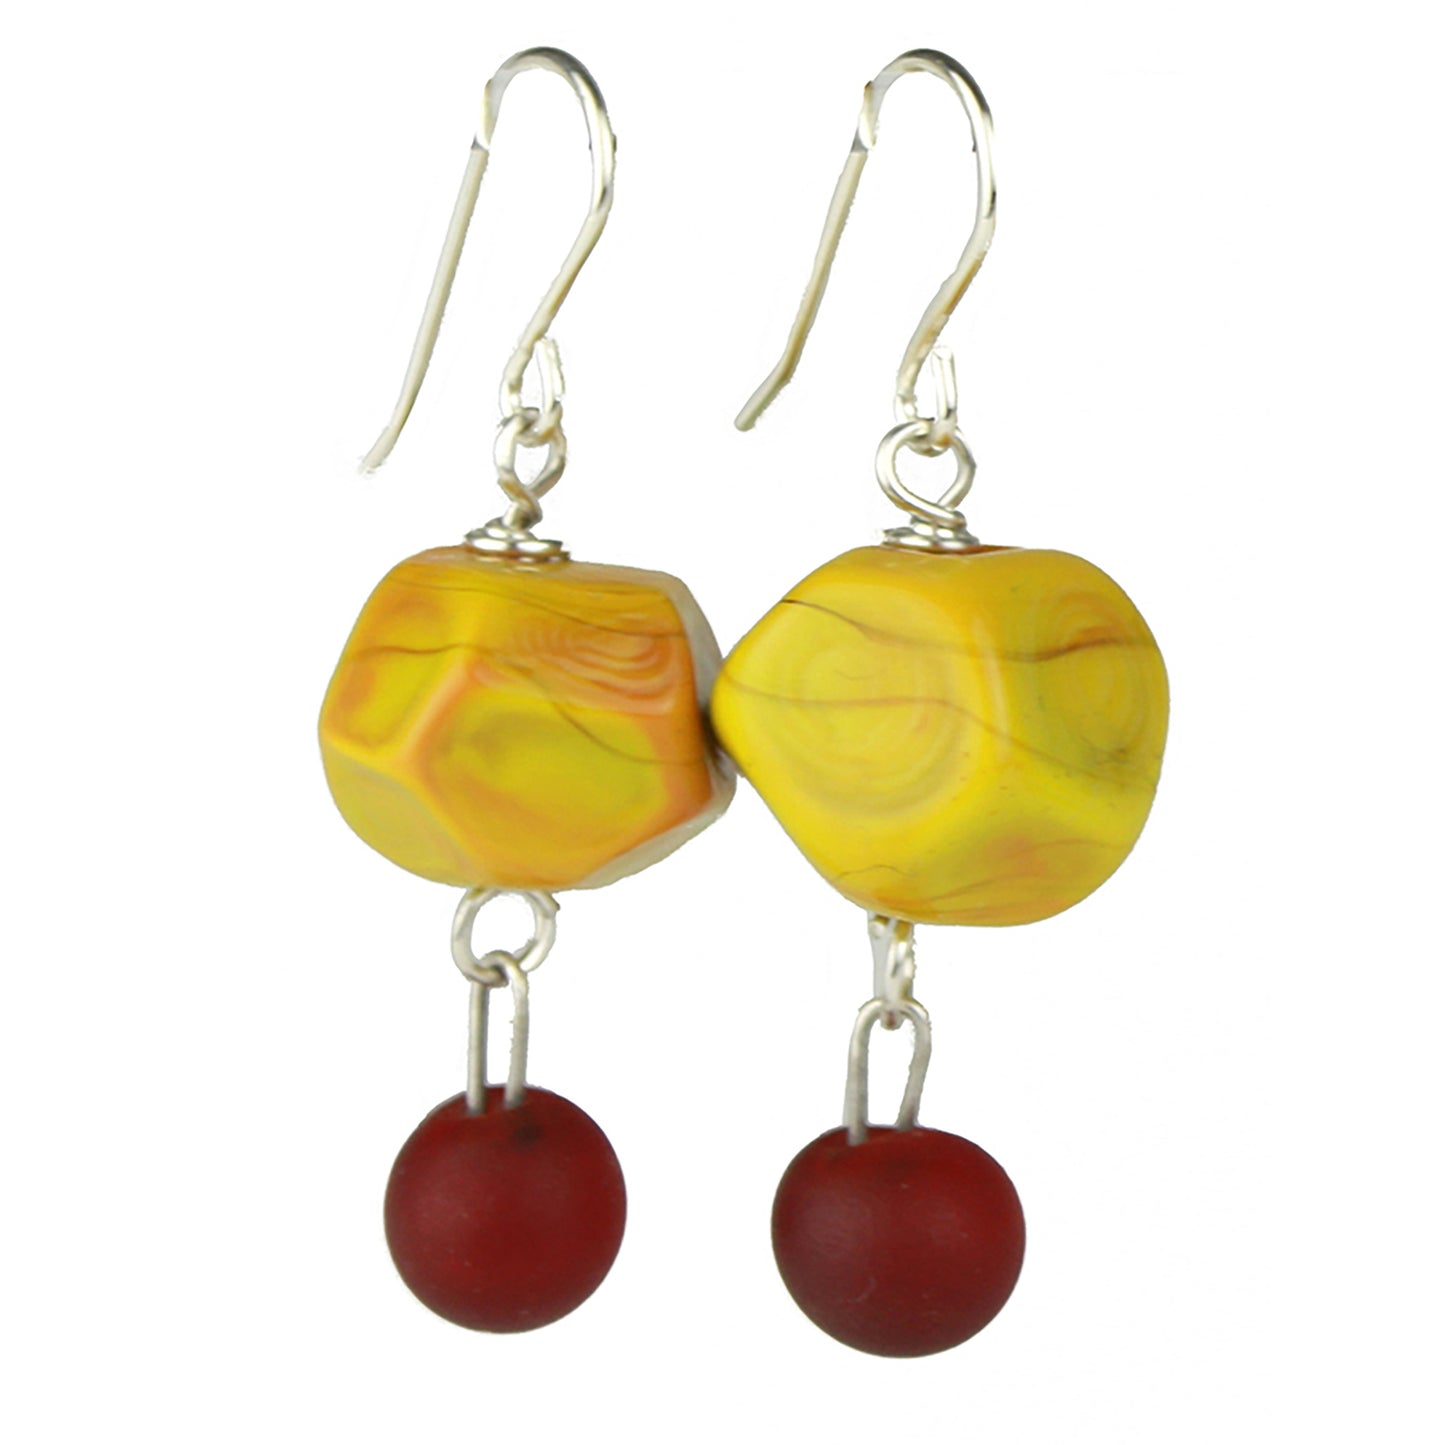 Nugget and charm earrings - ochre yellow and deep red